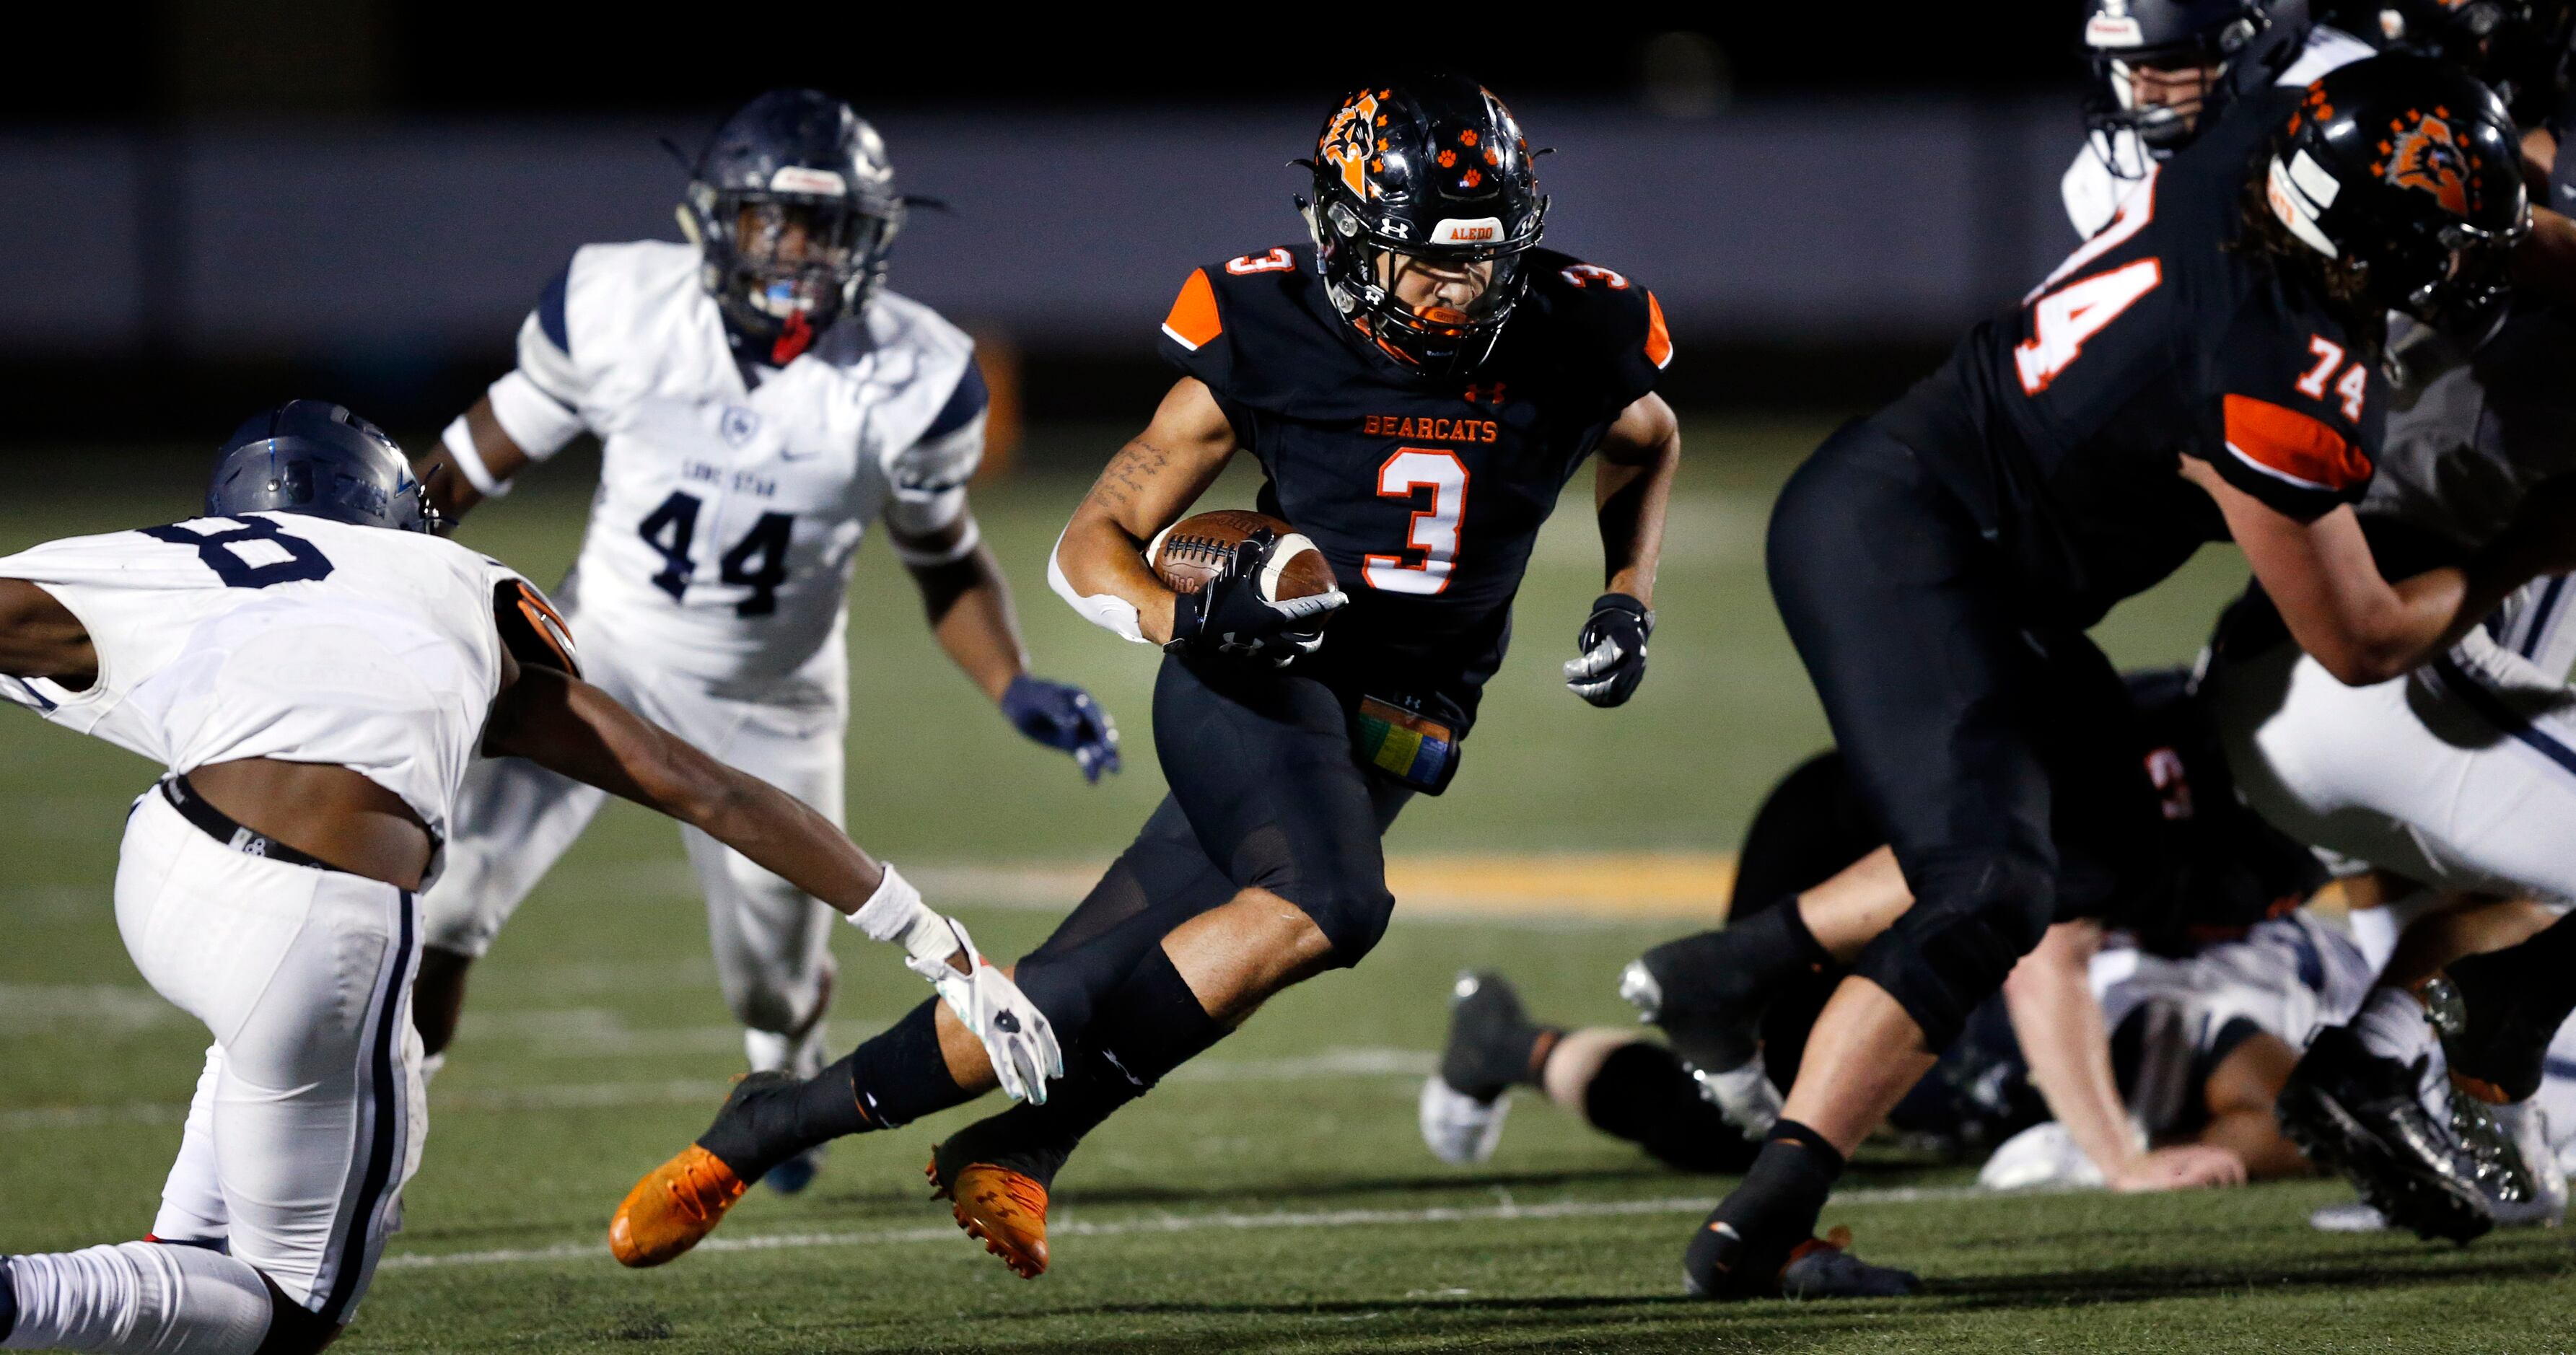 Aledo running back Jeremiah James (3) cuts to the inside away from Frisco Lone Star...